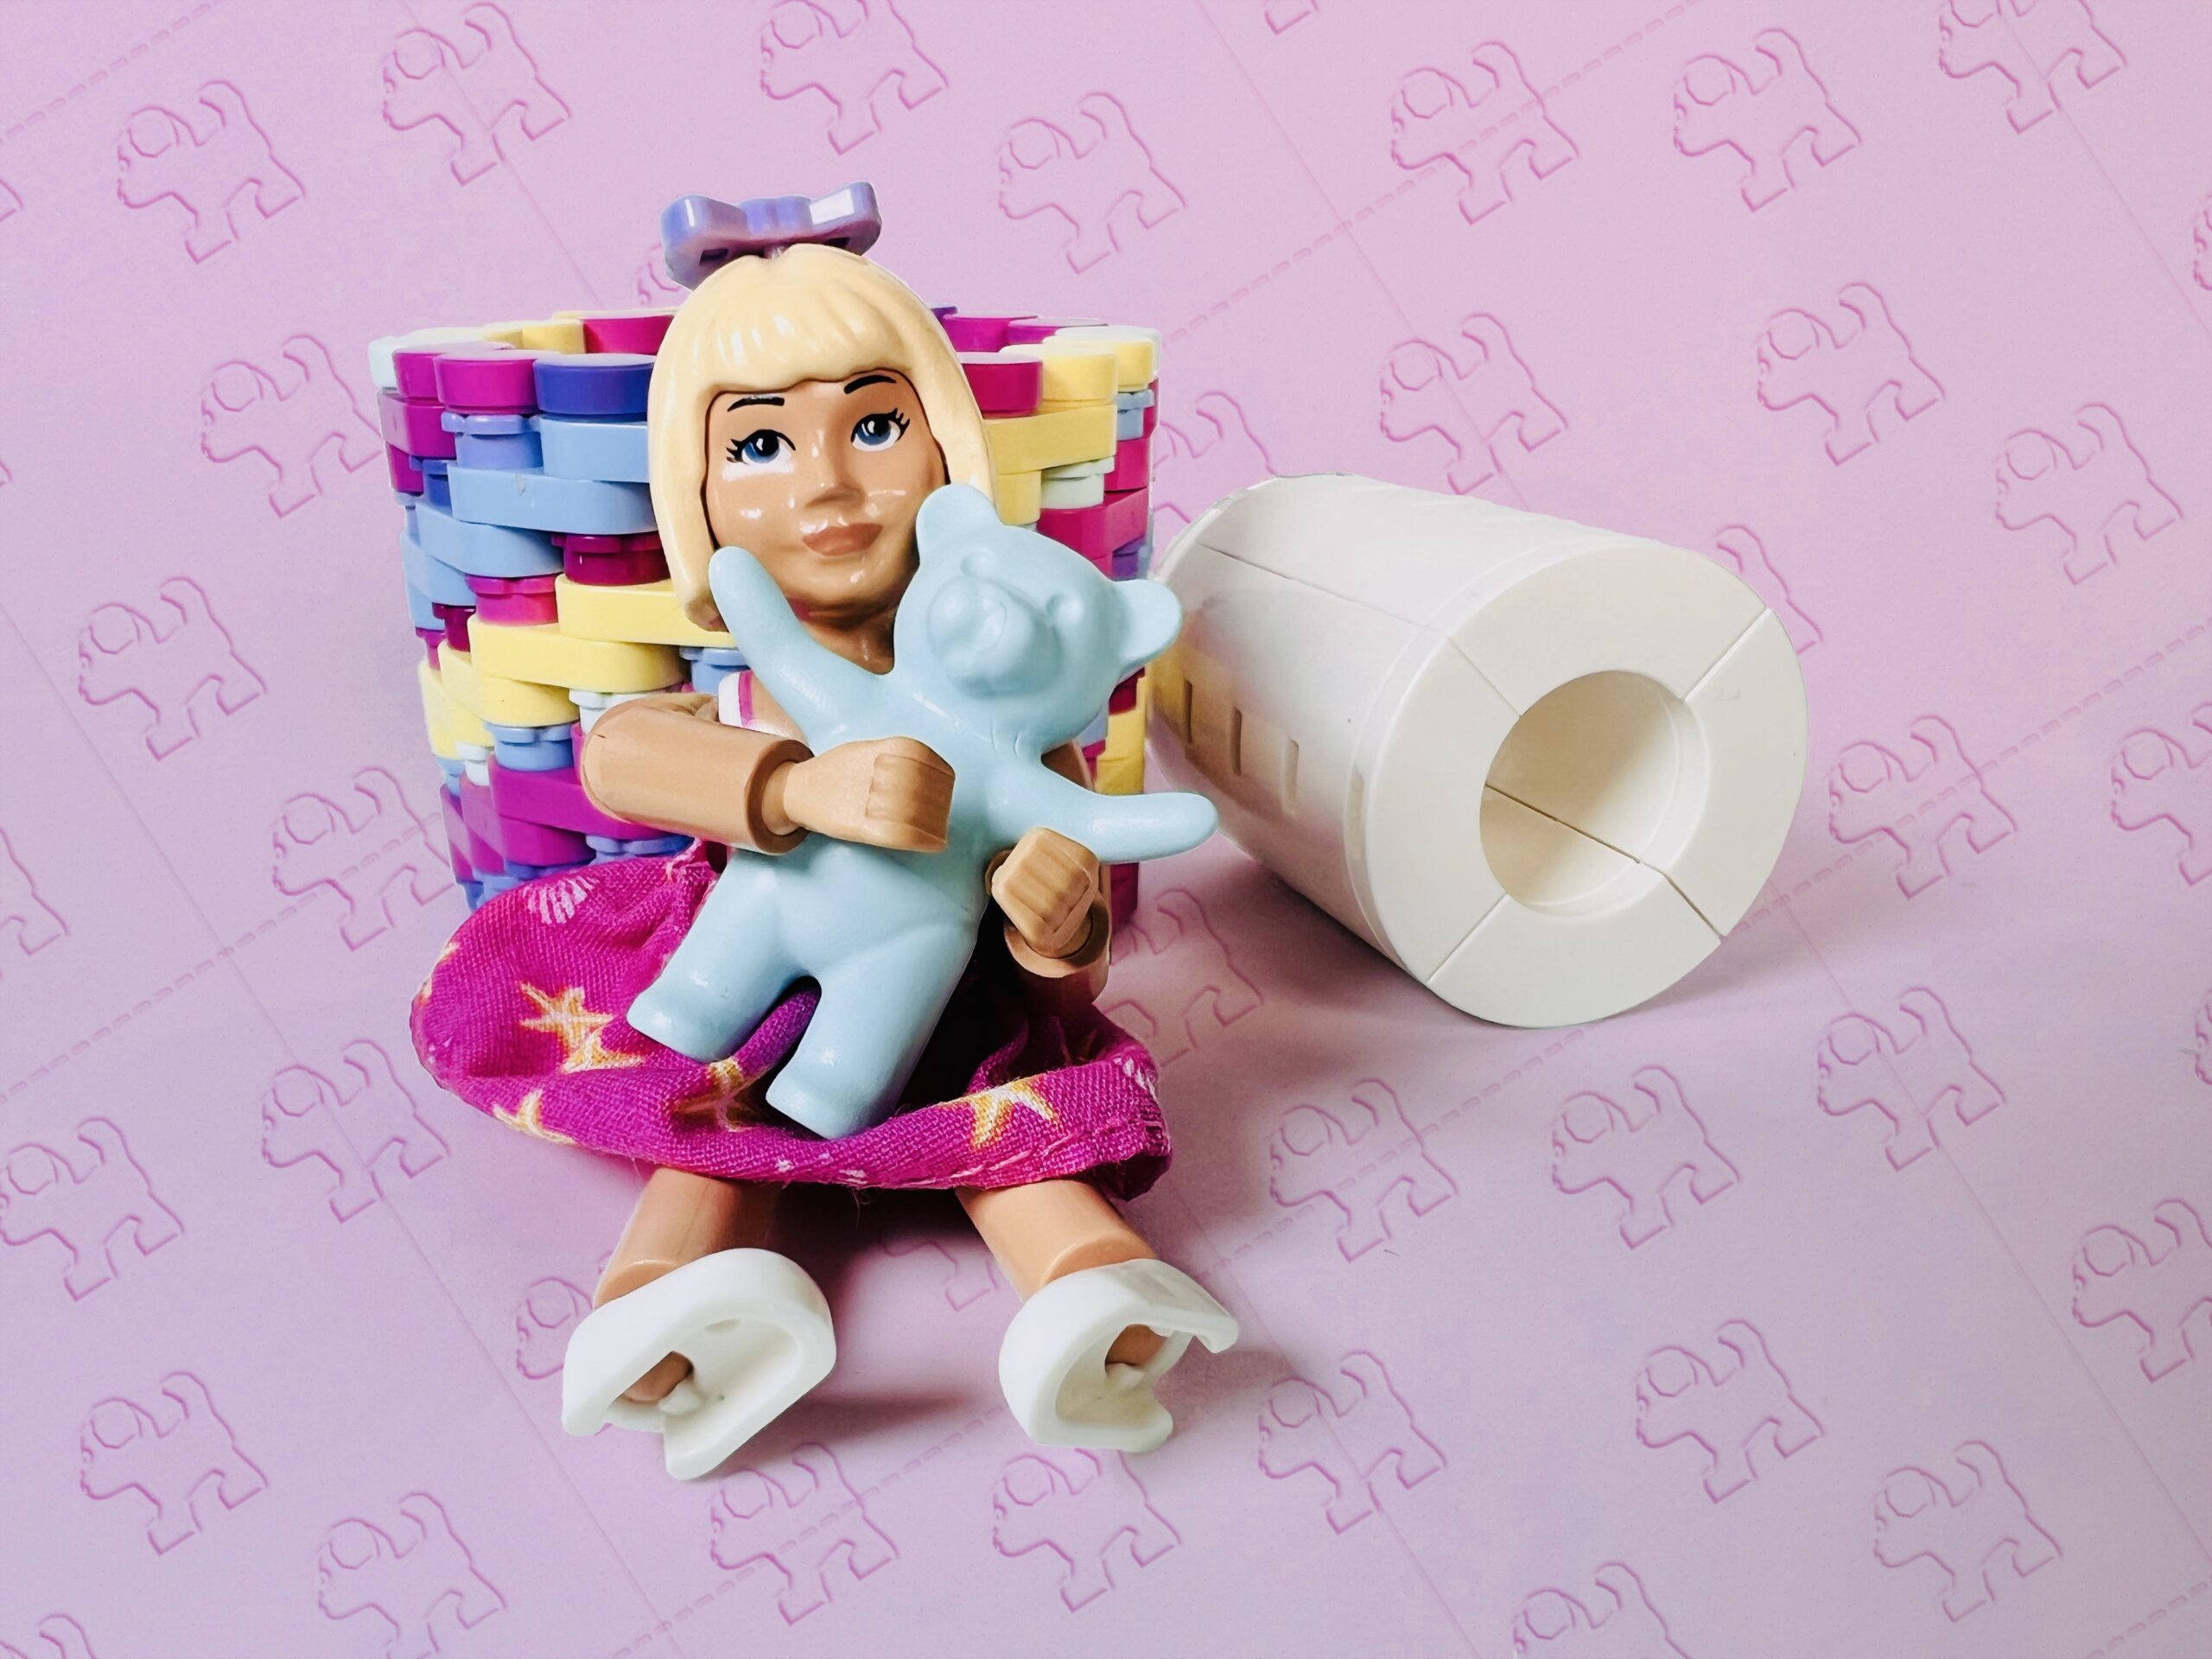 Small blonde doll holding a teddy bear, next to a brick-built toilet roll.